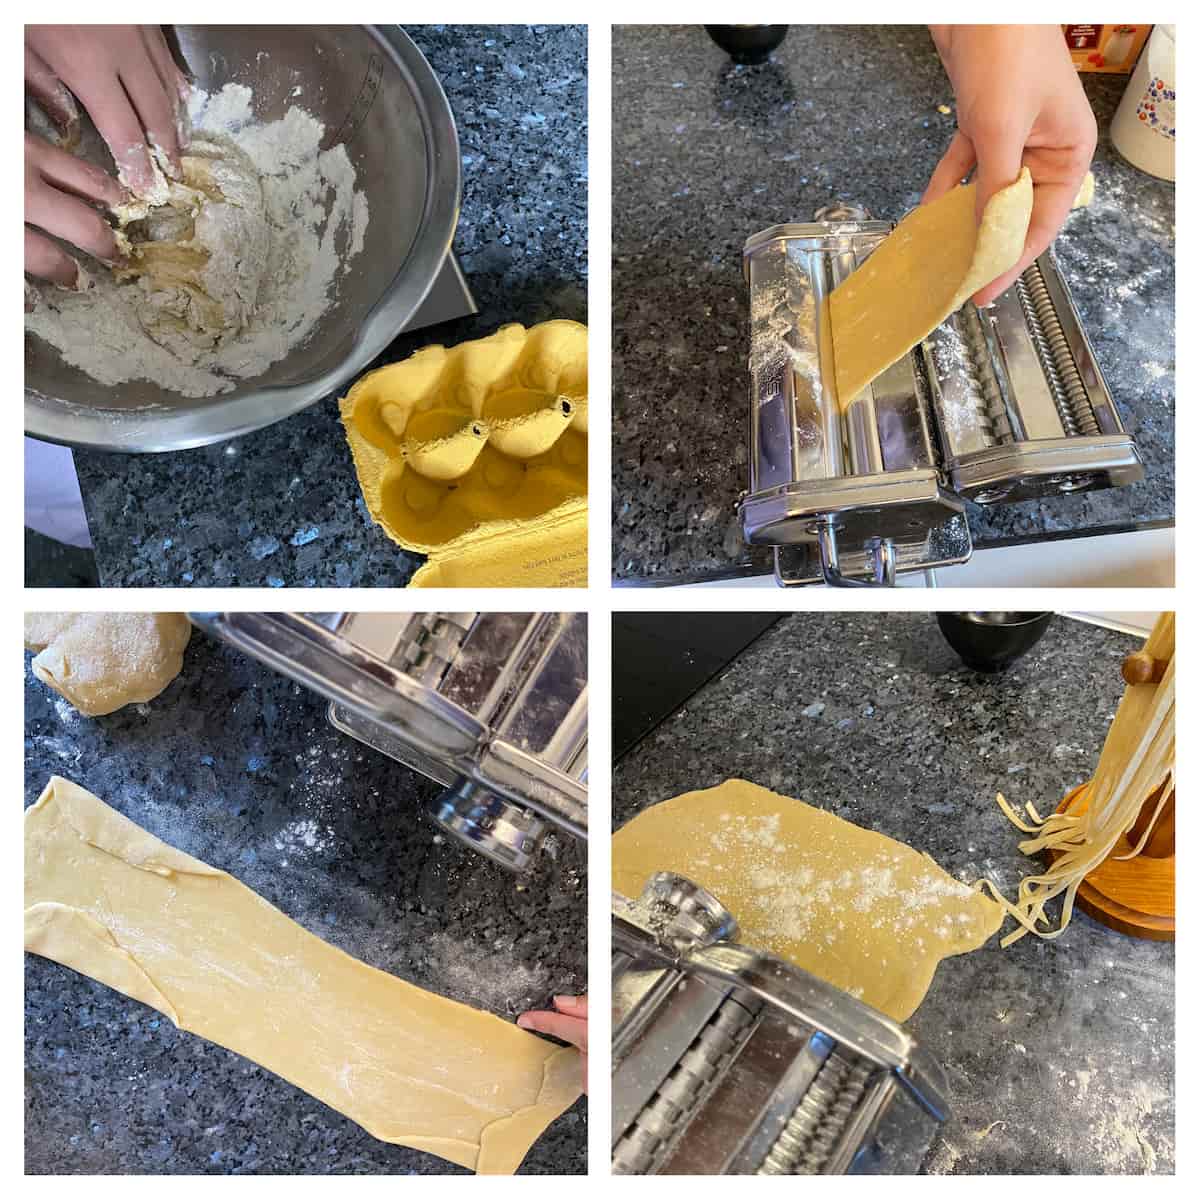 4 diagrams of making egg noodles, homemade pasta